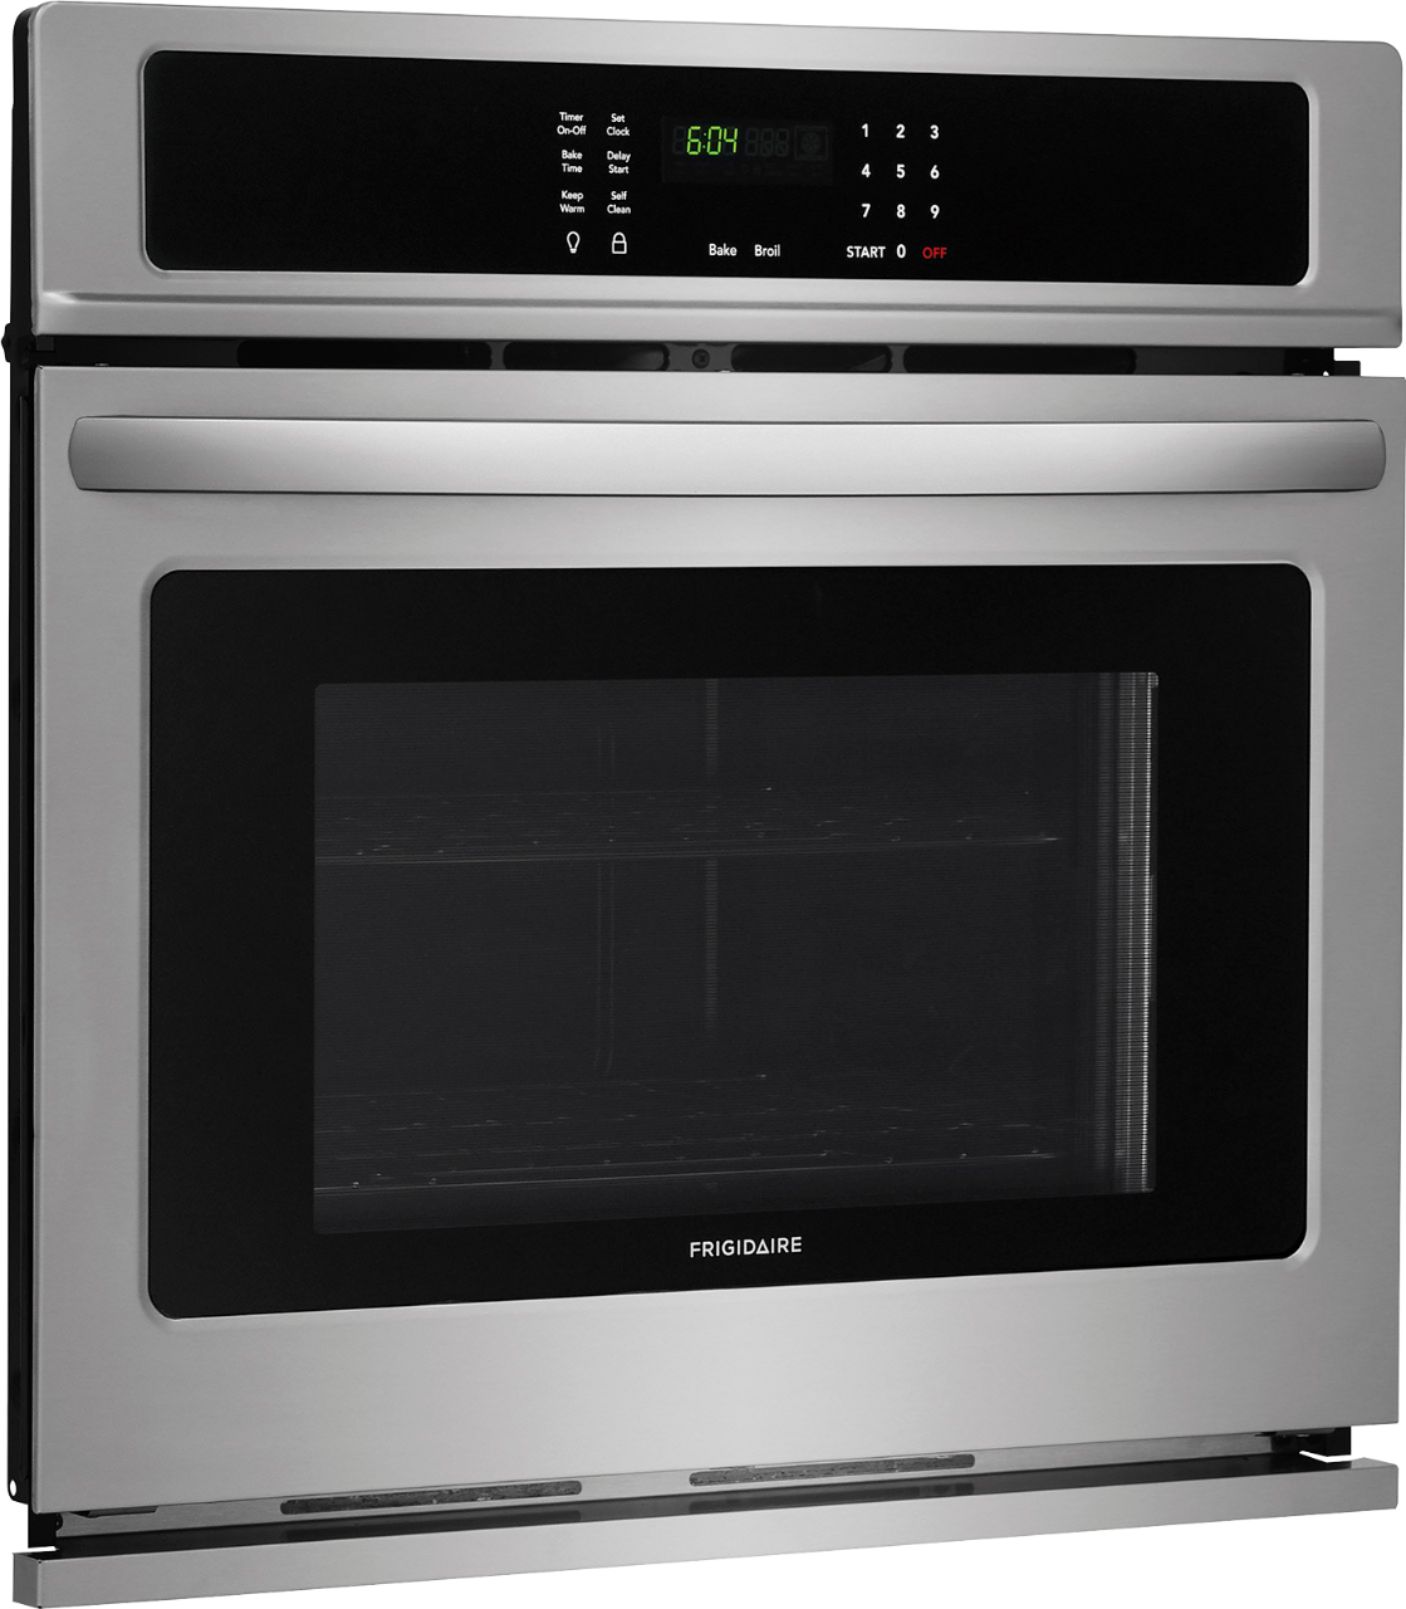 Angle View: Frigidaire - 27" Built-In Single Electric Wall Oven - Stainless steel